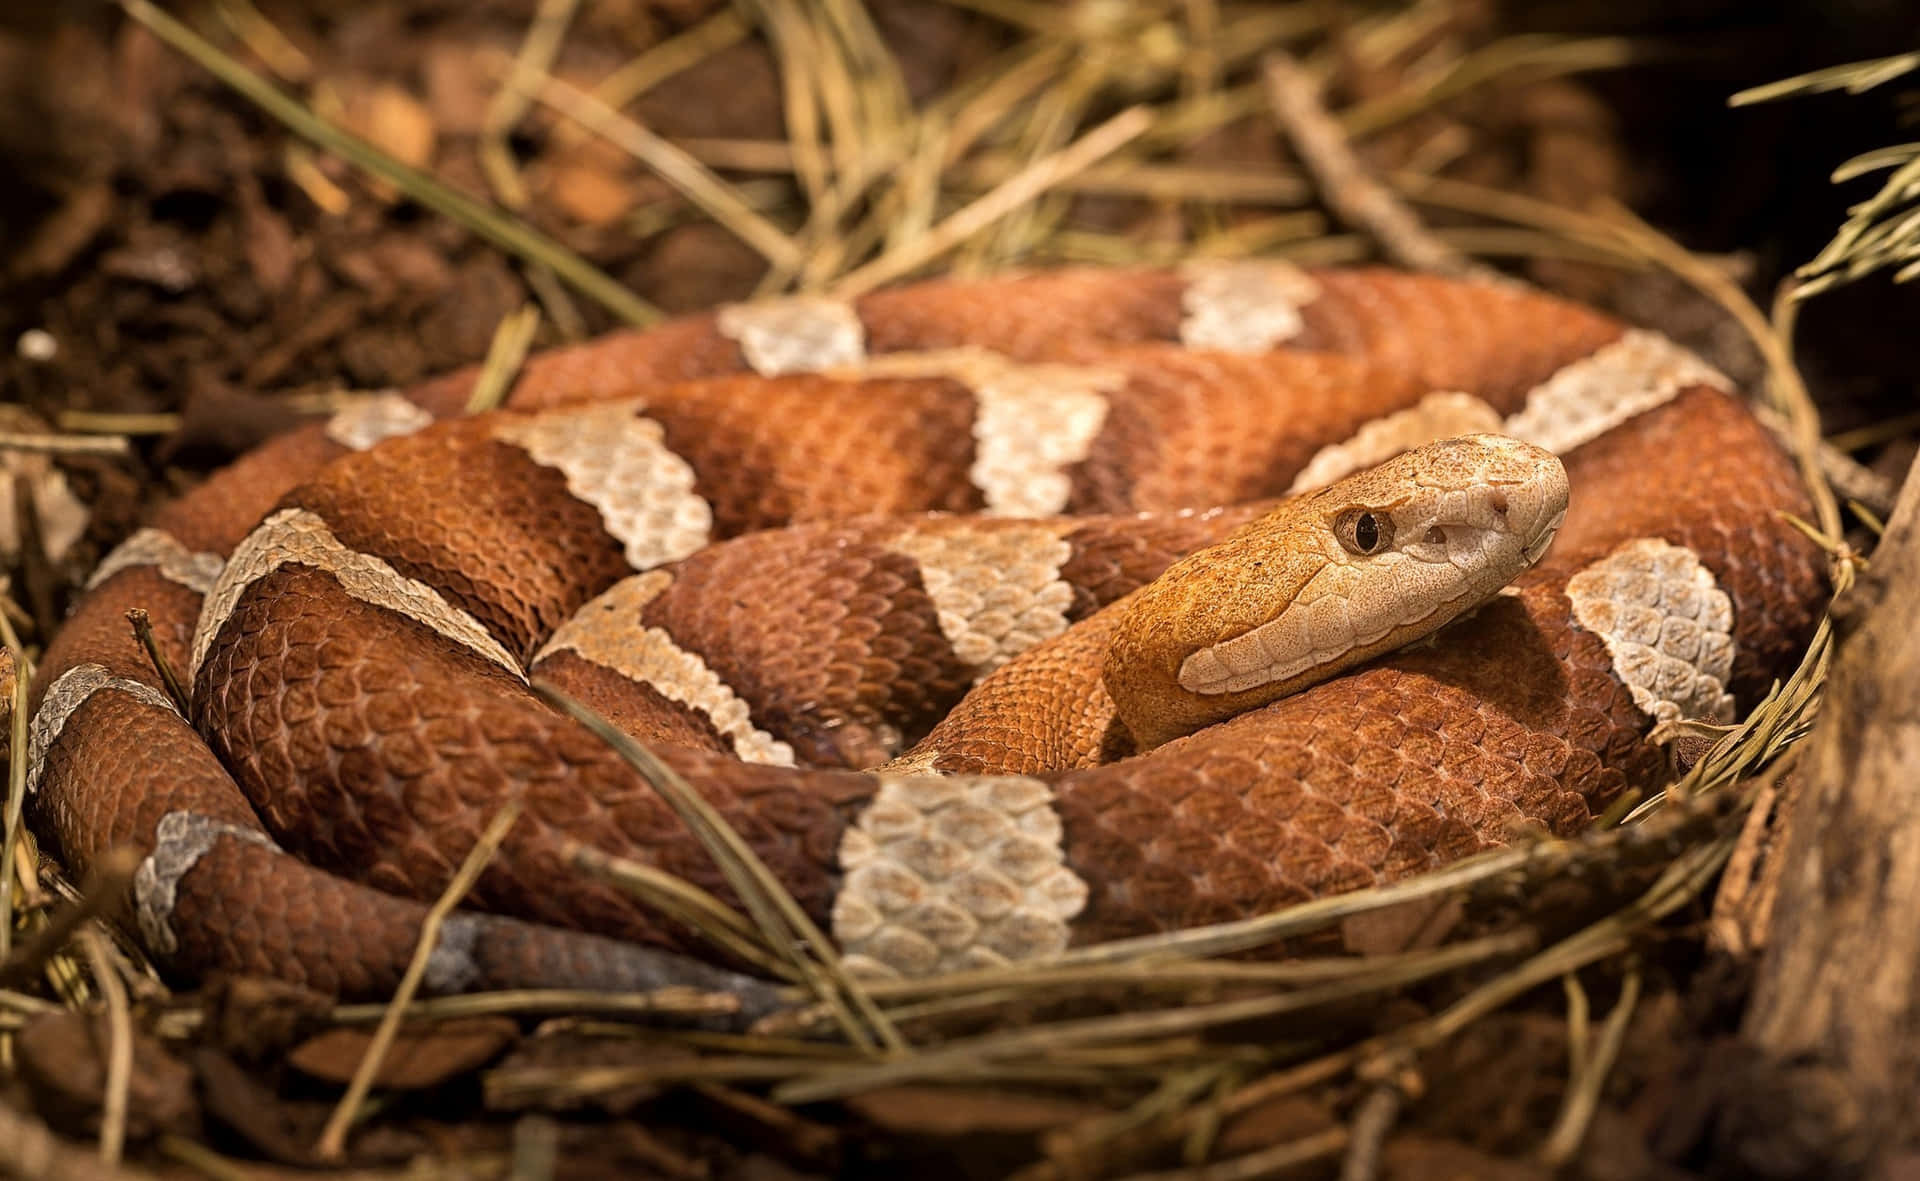 Close-up photo of a copperhead snake